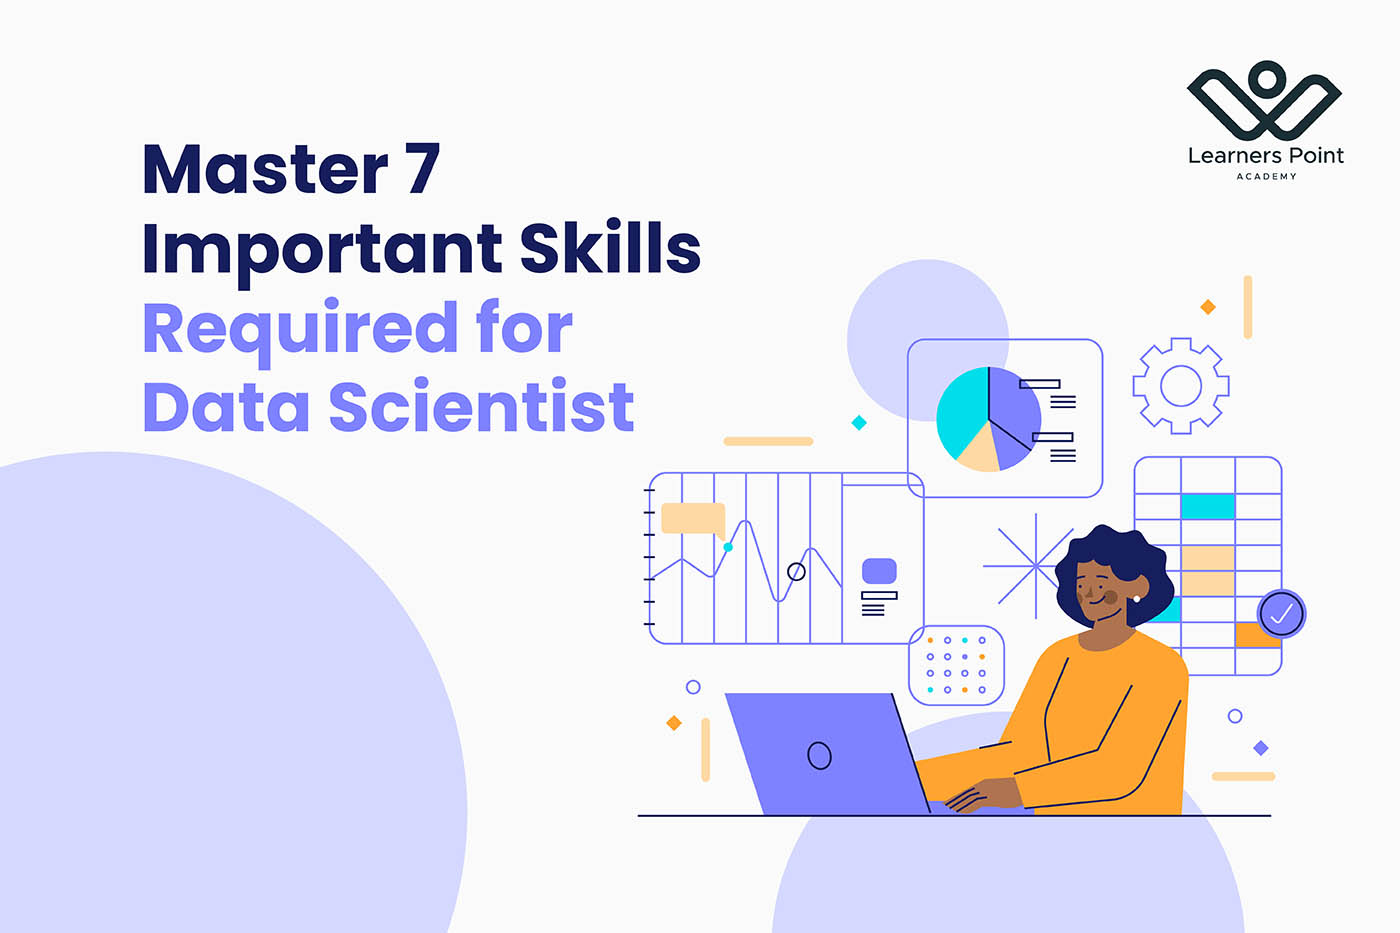 Master 7 Important Skills Required for Data Scientist